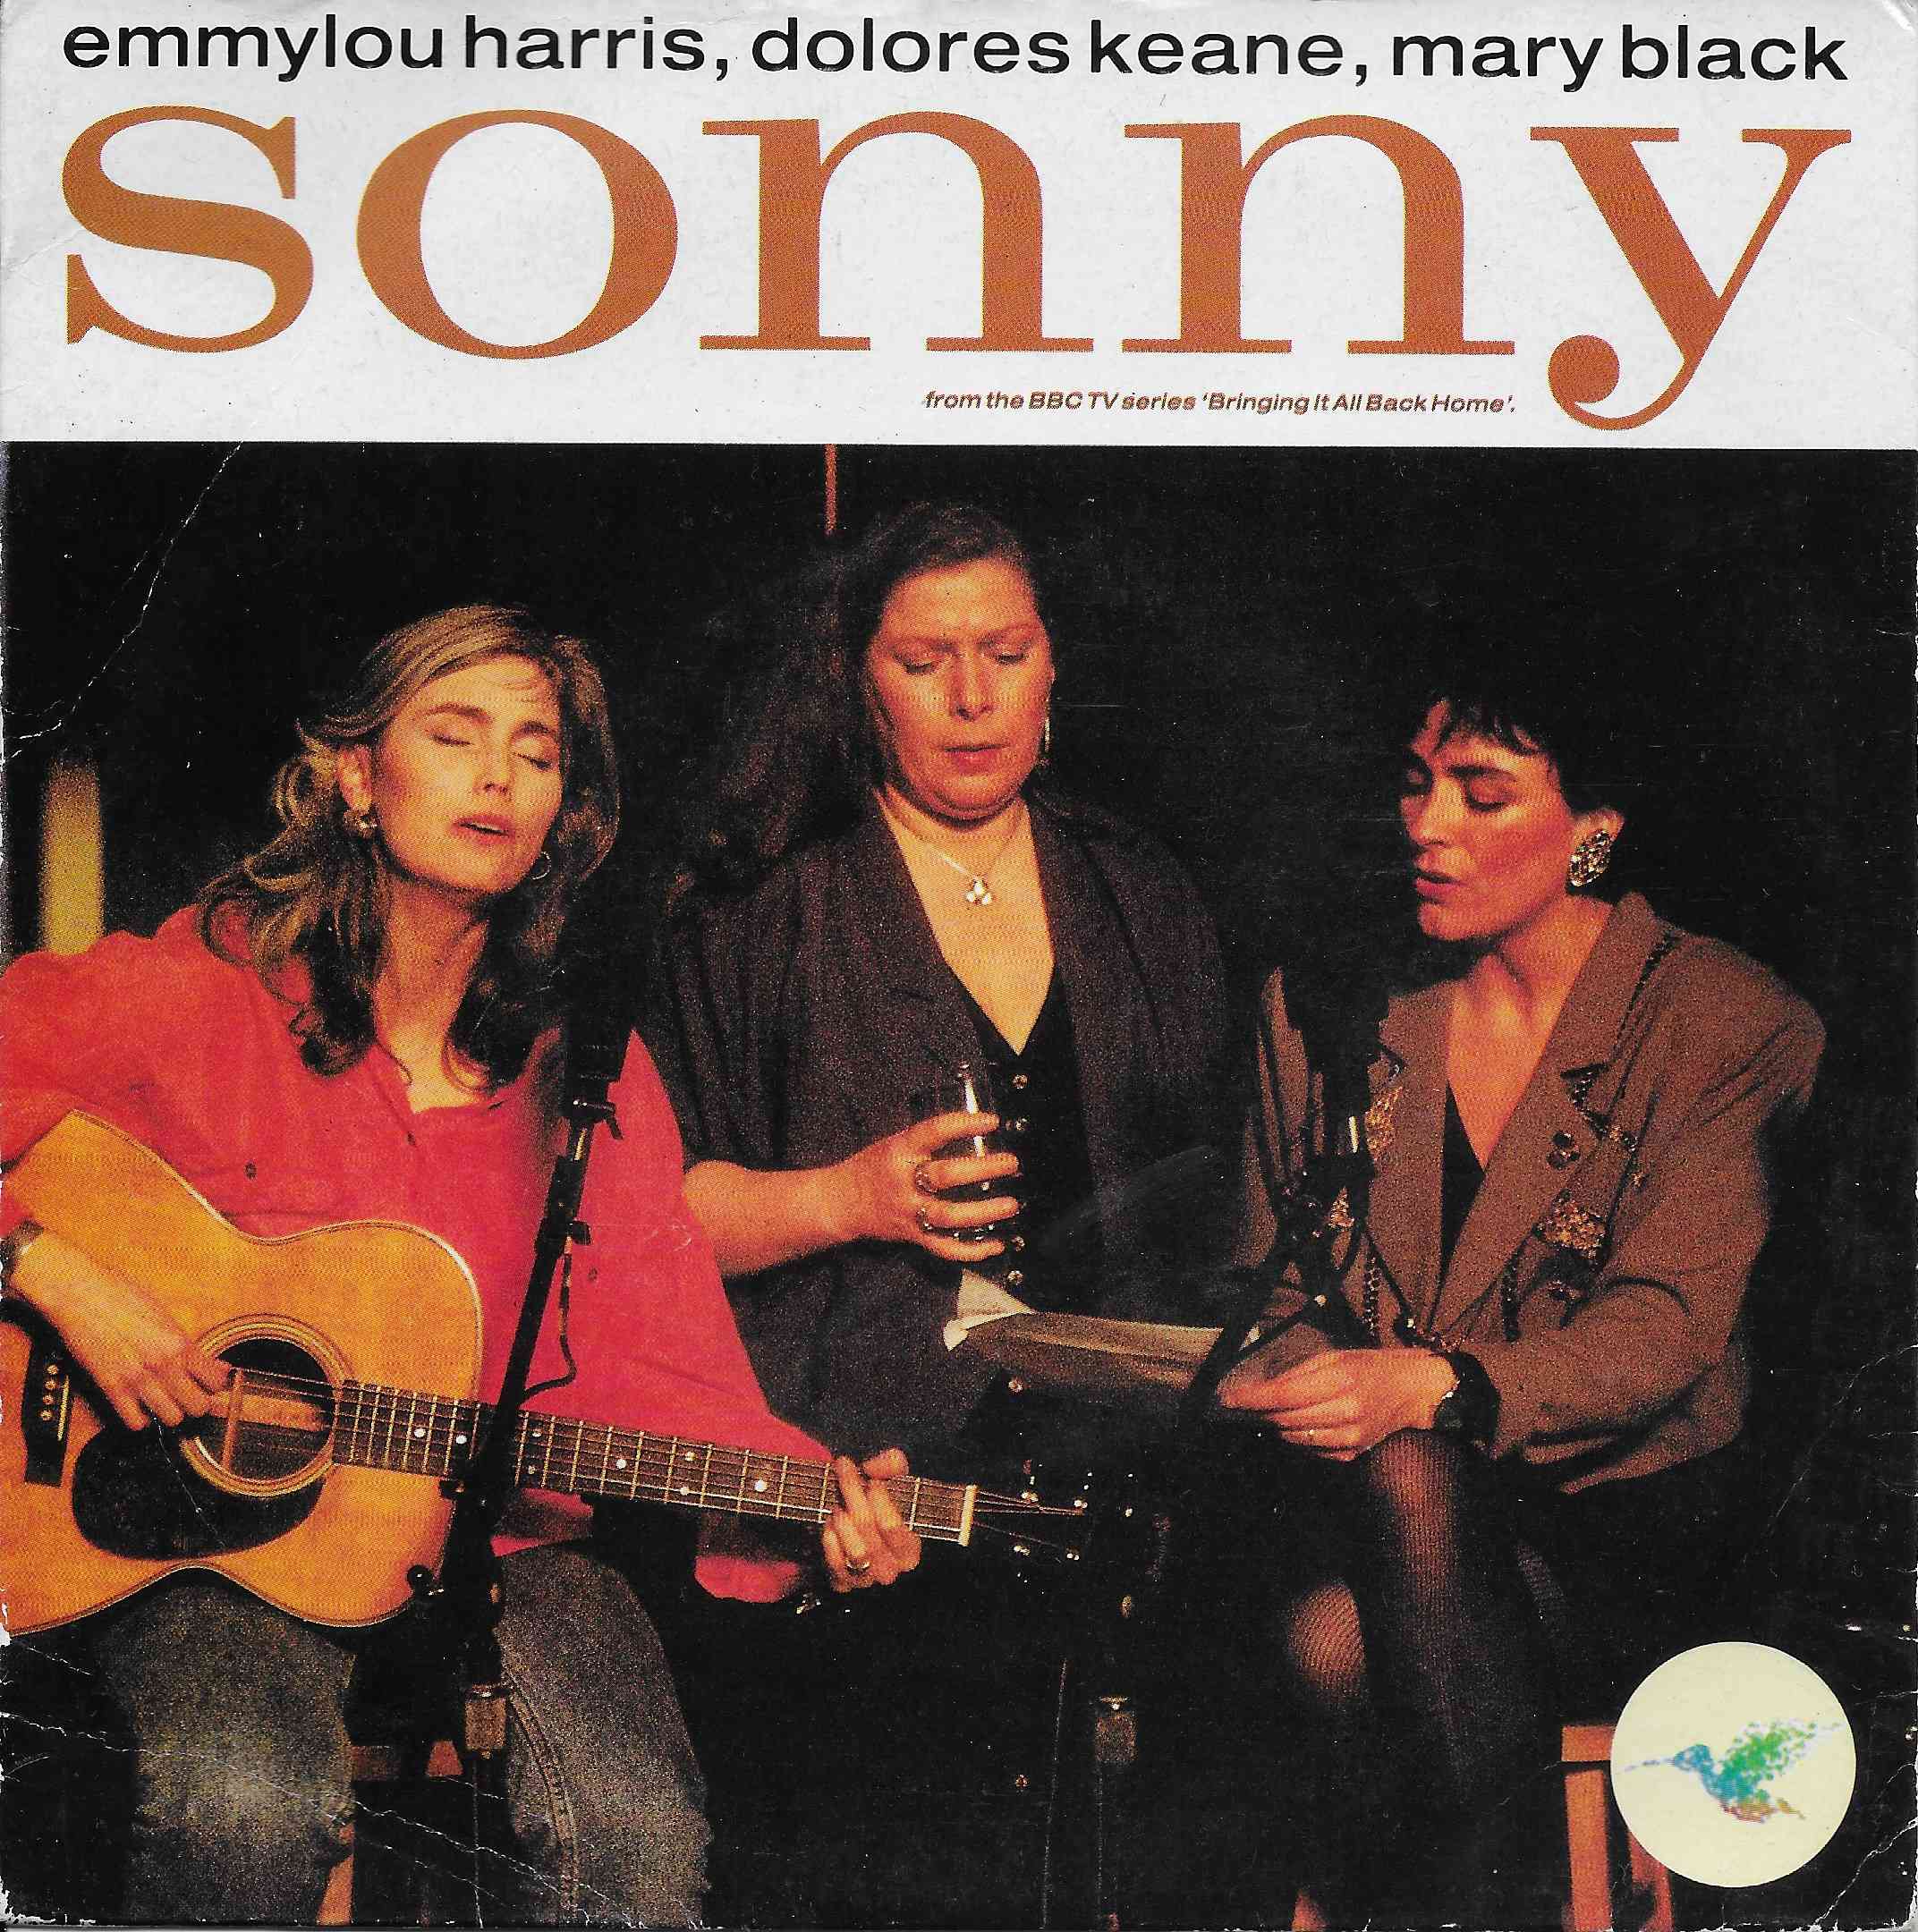 Picture of BIAB 1 Sonny by artist R. Hynes / The Voice Squad / Emmylou Harris / Dolores Keane / Mary Black from the BBC singles - Records and Tapes library